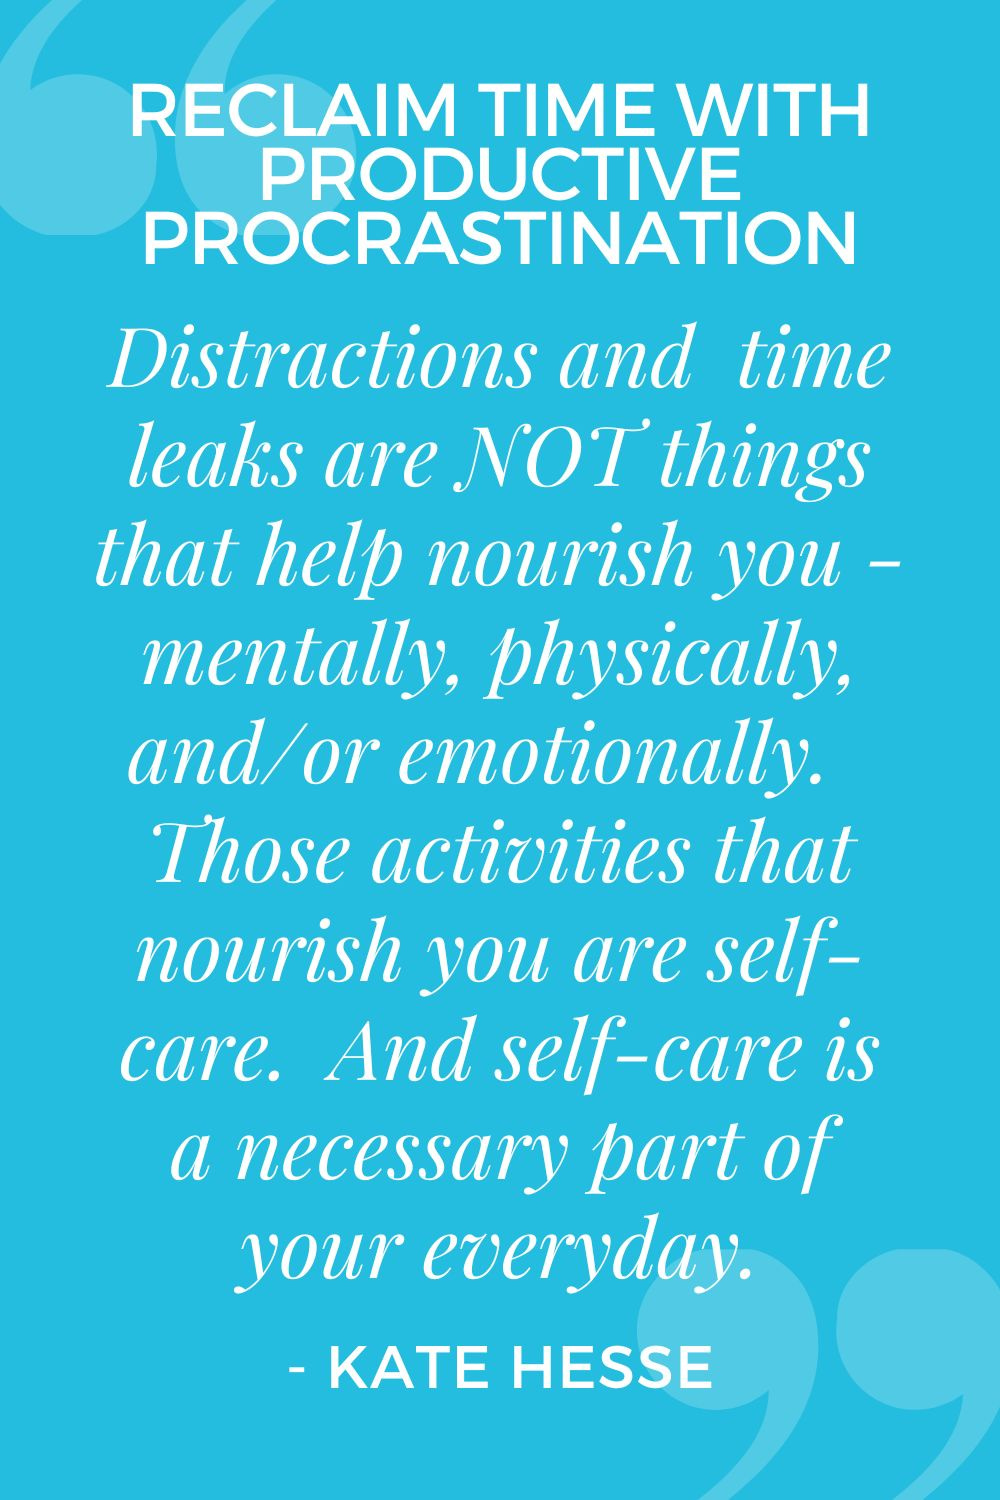 Distractions and time leaks are NOT things that help nourish you - mentally, physically, and/or emotionally. Those activities that nourish you are self-care. And self-care is a necessary part of your everyday.